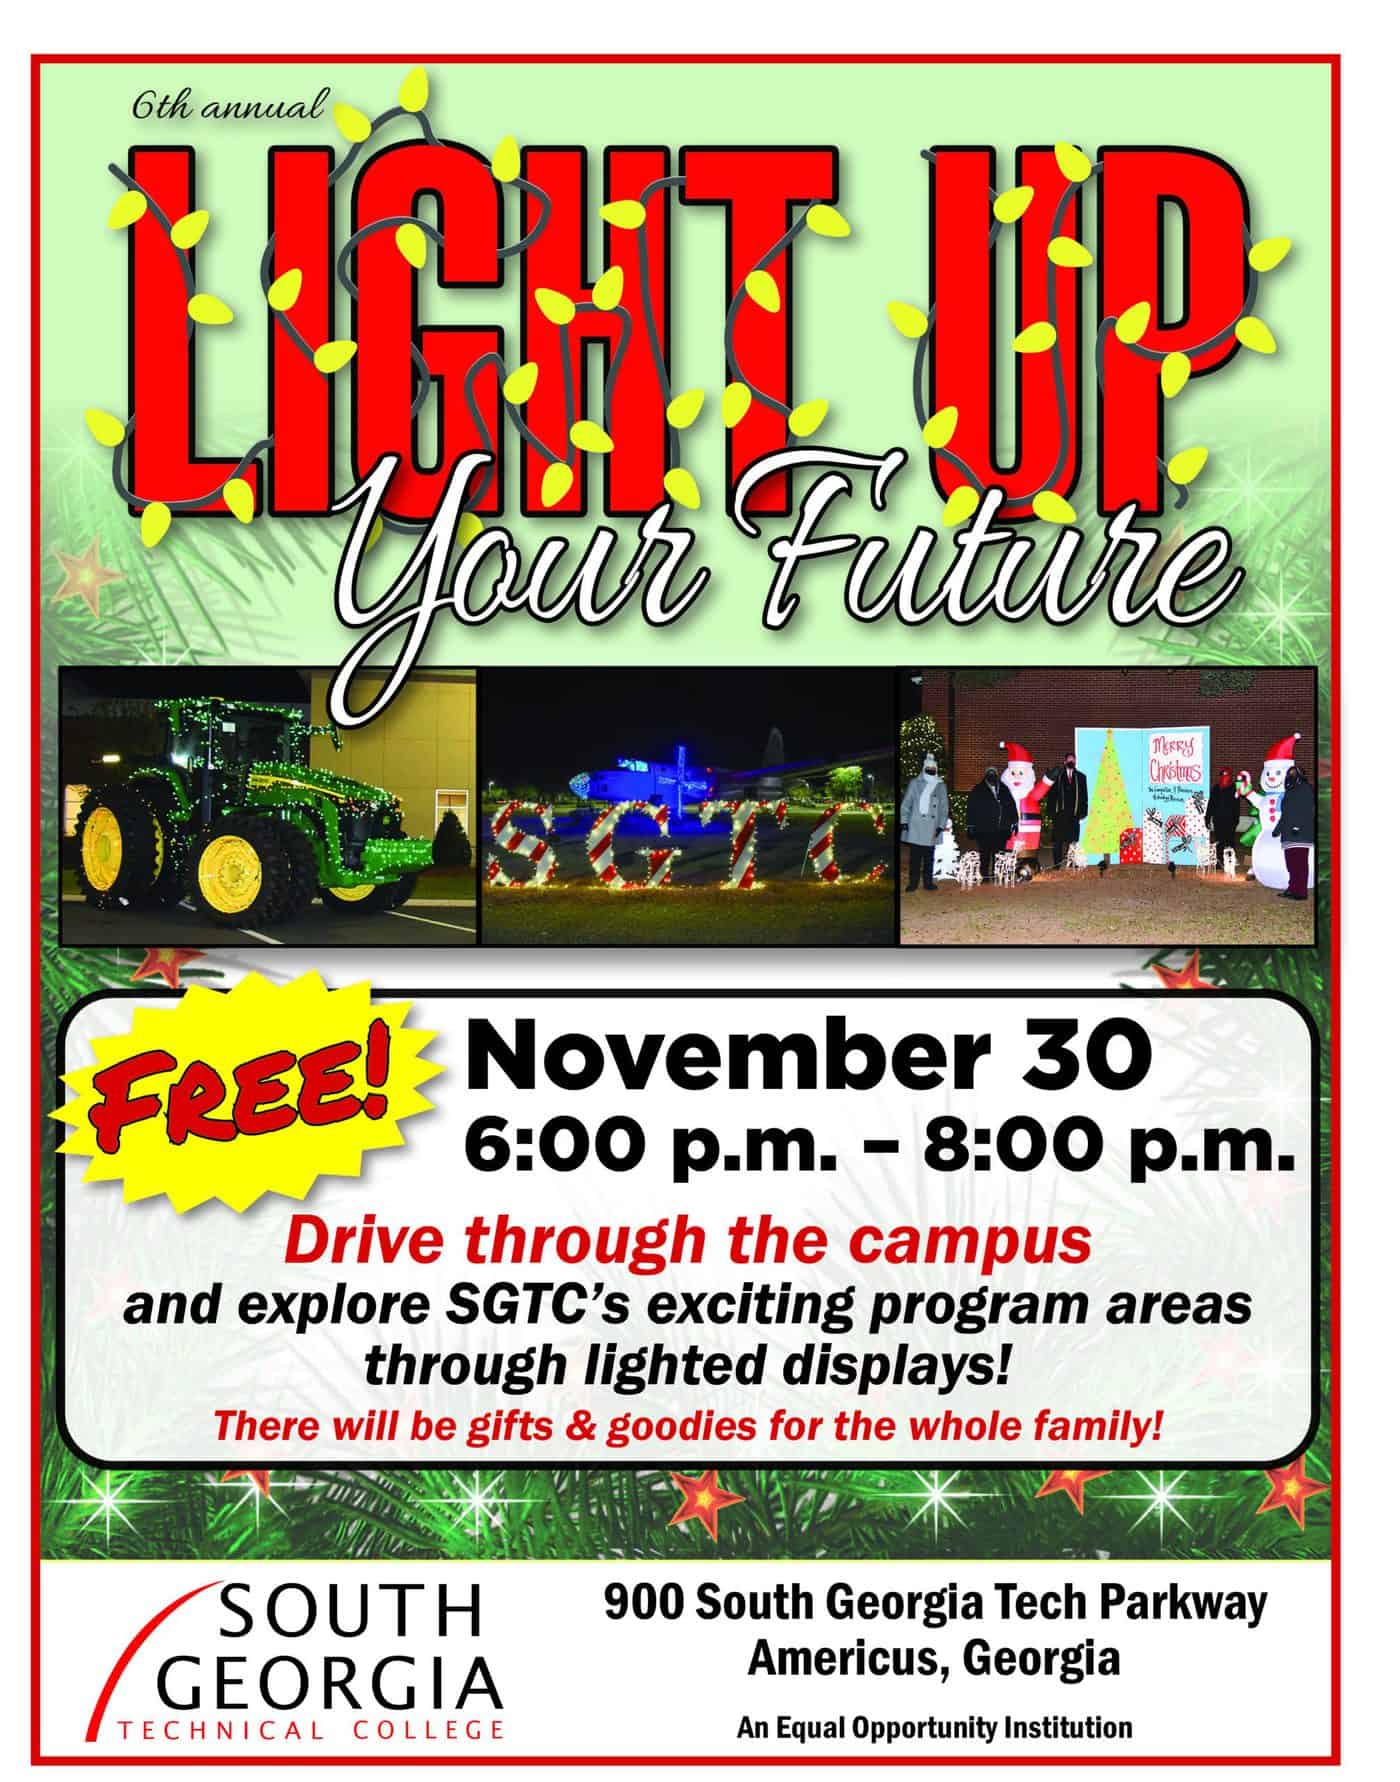 Everyone is invited to the FREE 6th annual “Light Up Your Future” Event at South Georgia Technical College on Tuesday, November 30th from 6 p.m. to 8 p.m.